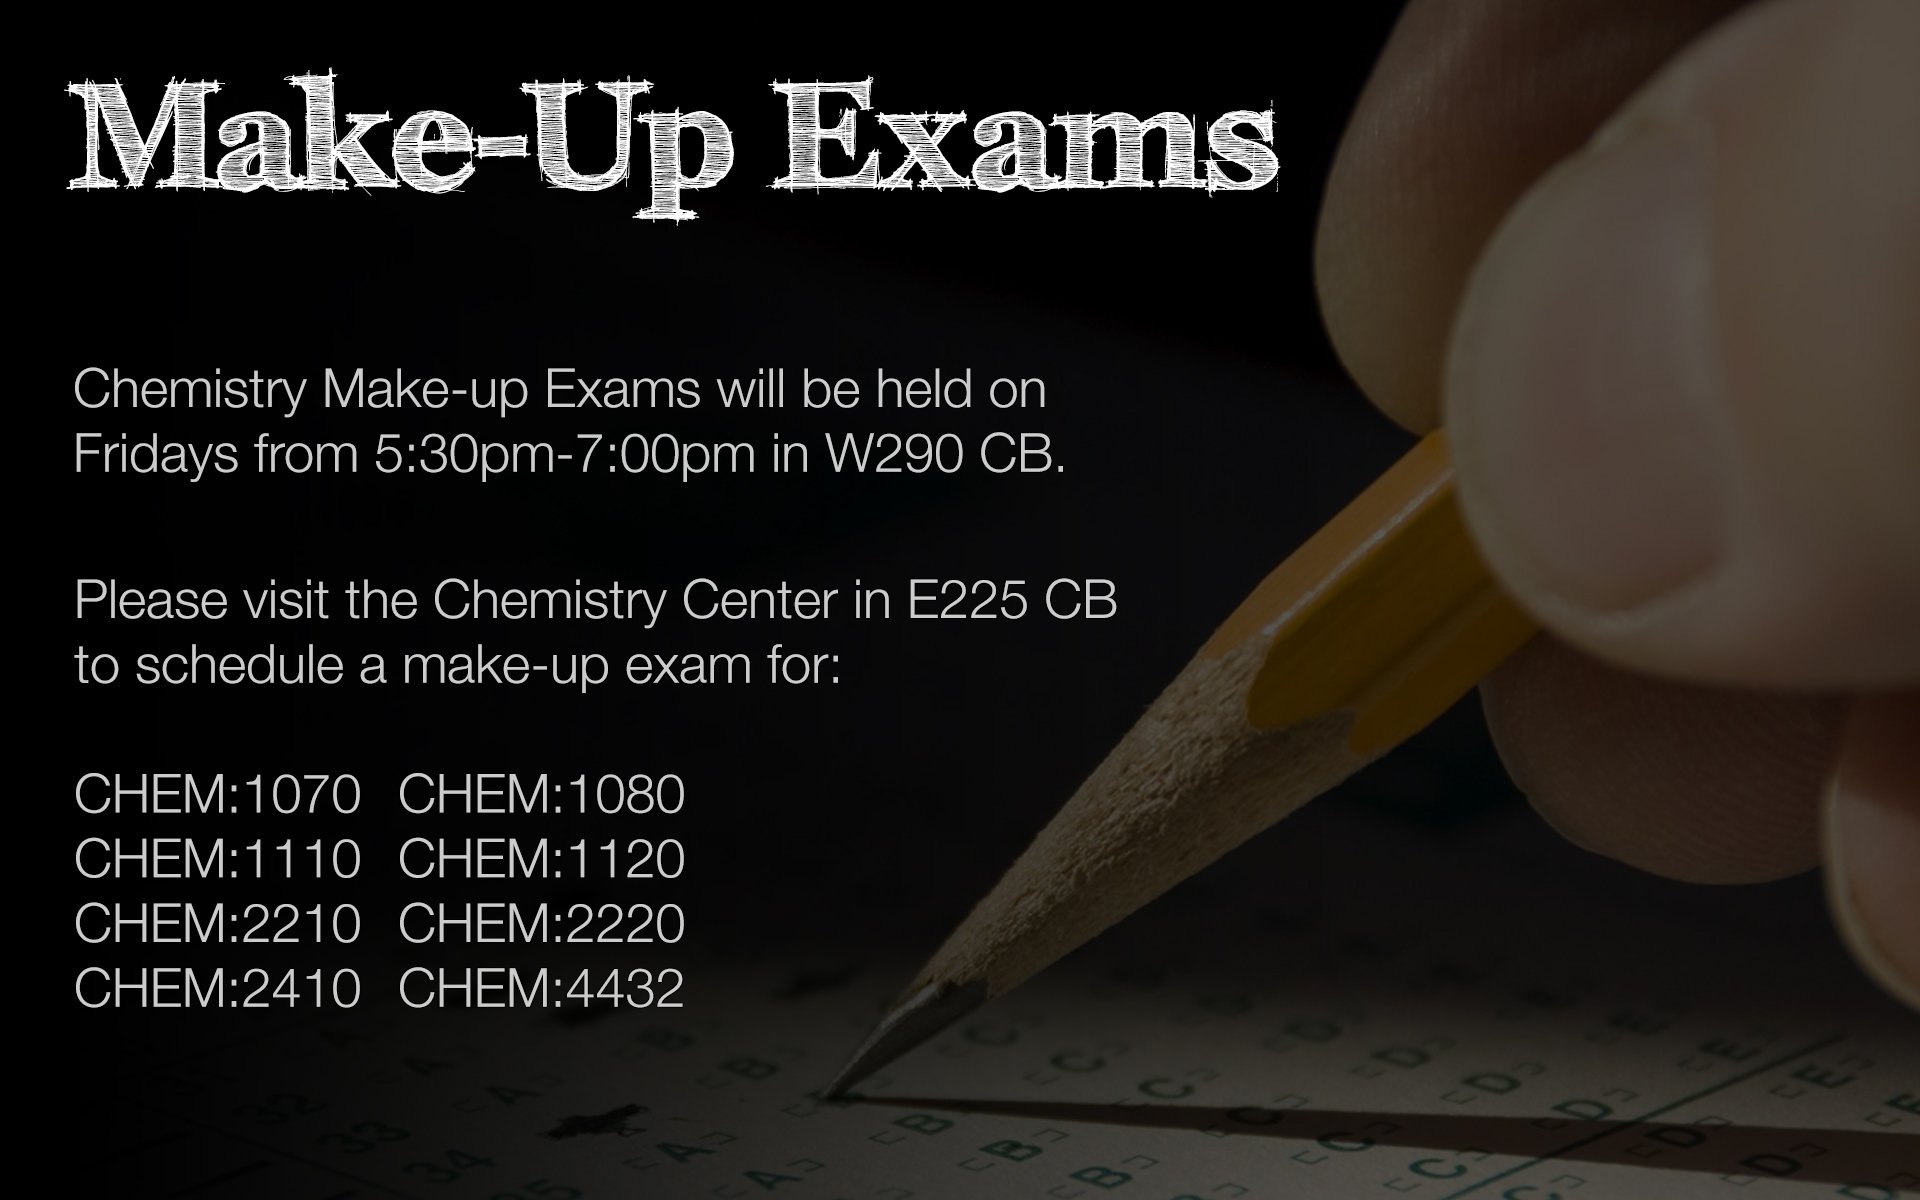 Chemistry Make-Up Exams will be held on Fridays from 5:30pm - 7:00pm in W290 CB.